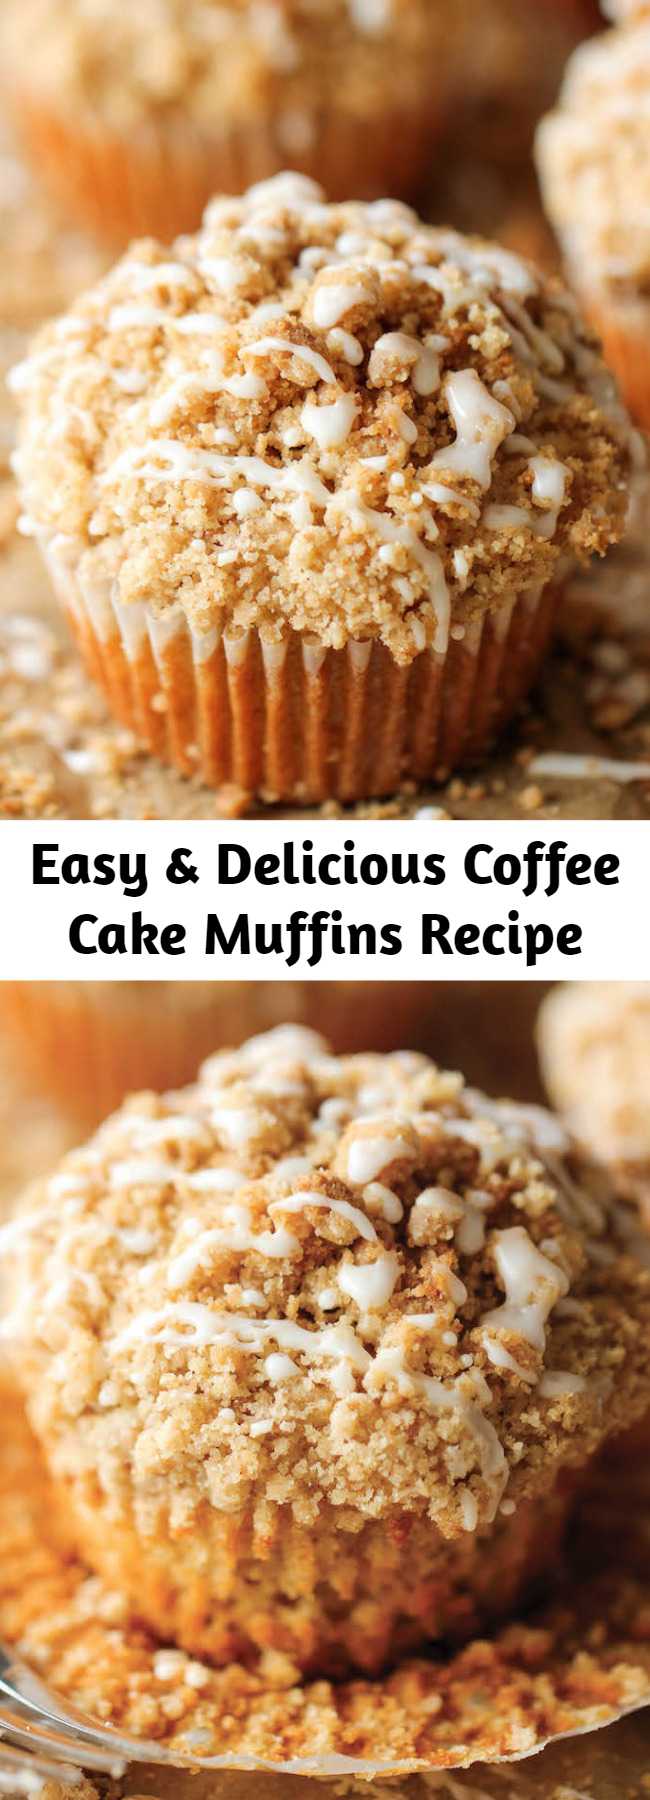 Easy & Delicious Coffee Cake Muffins Recipe - The classic coffee cake is transformed into a convenient muffin, loaded with a mile-high crumb topping!